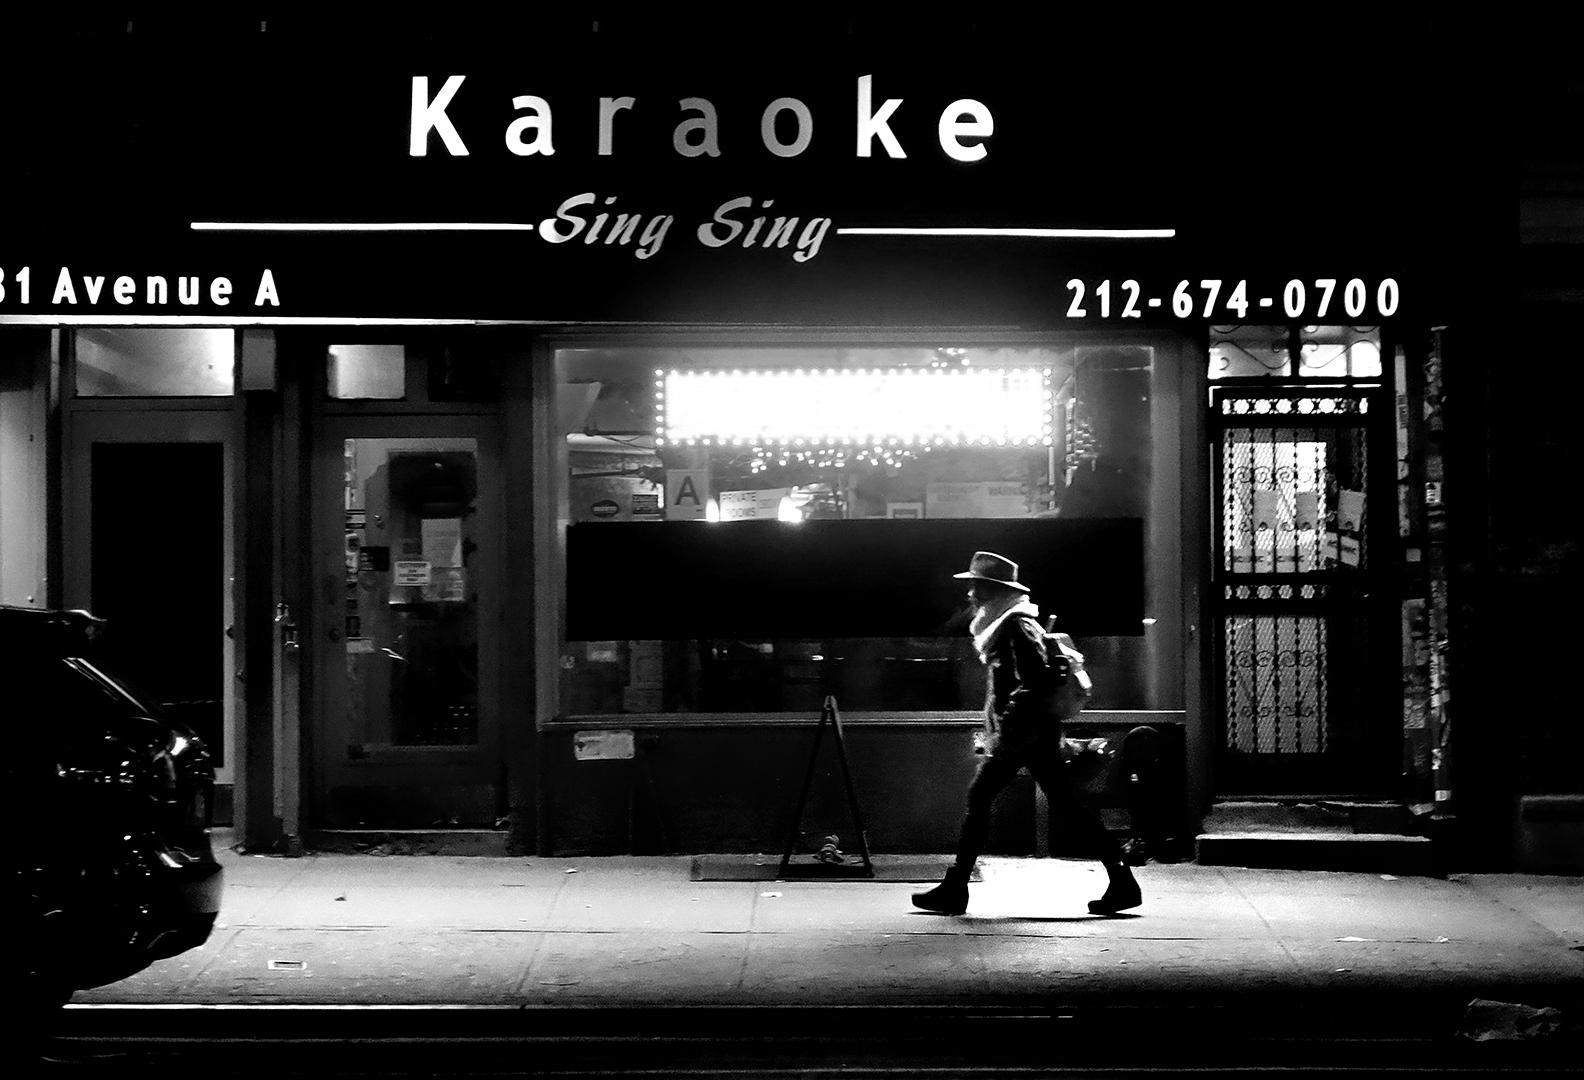 Artist: Sally Davies (1956)
Title: Karaoke (New York City)
Year: 2022
Medium: Inkjet print on archival paper
Edition: 23, plus proofs
Size: 17 x 22 inches
Condition: Excellent
Inscription: Signed, dated, titled by the artist
Notes: This photograph